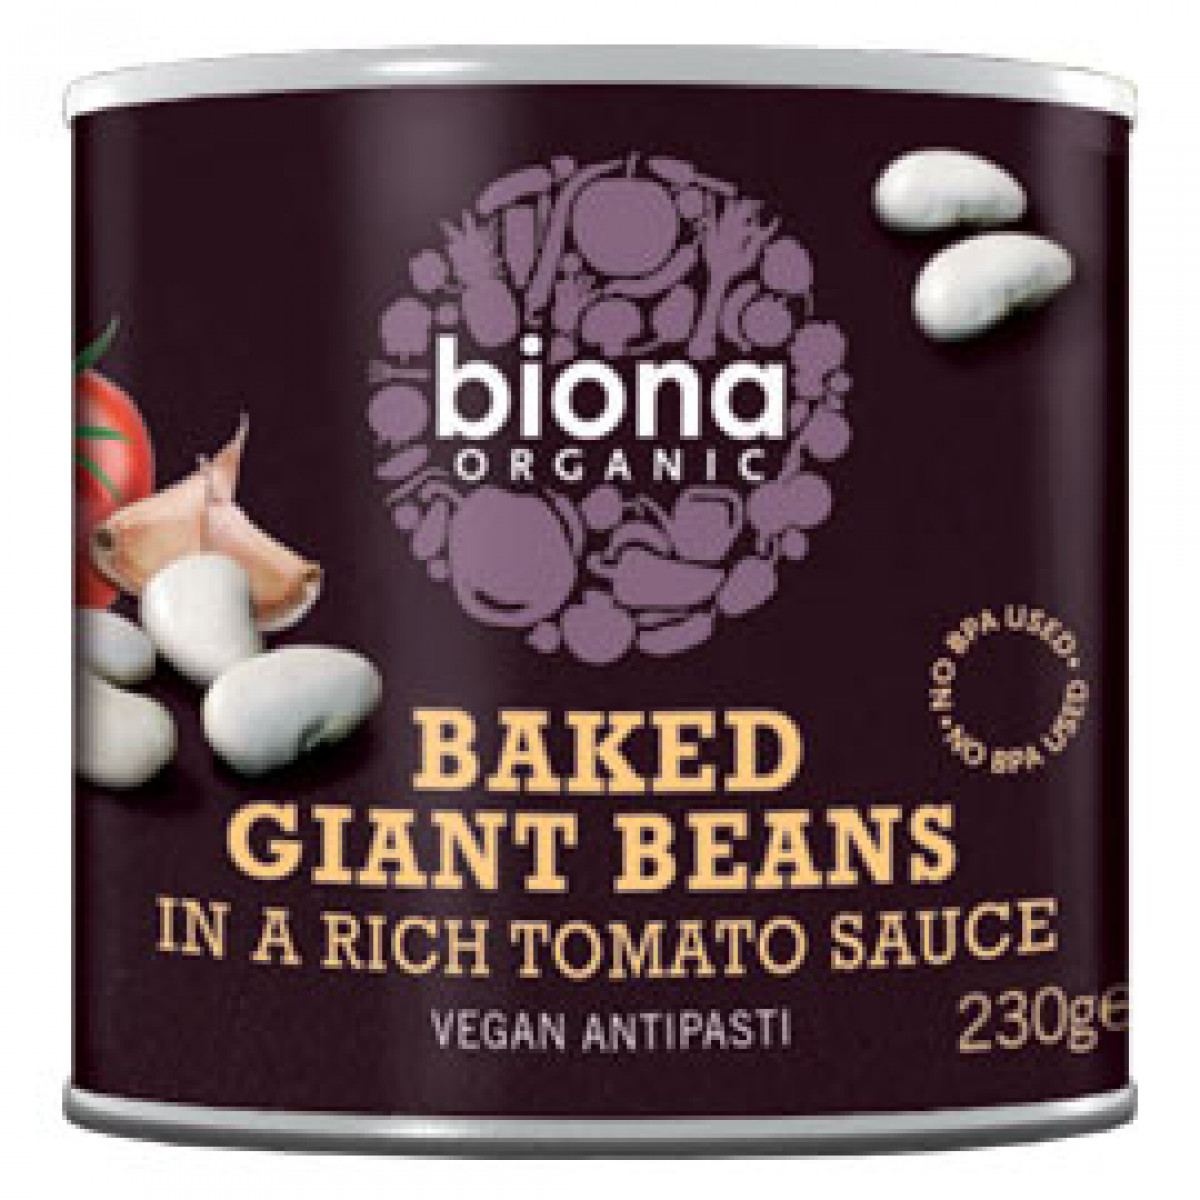 Product picture for Baked Giant Beans in Tomato Sauce